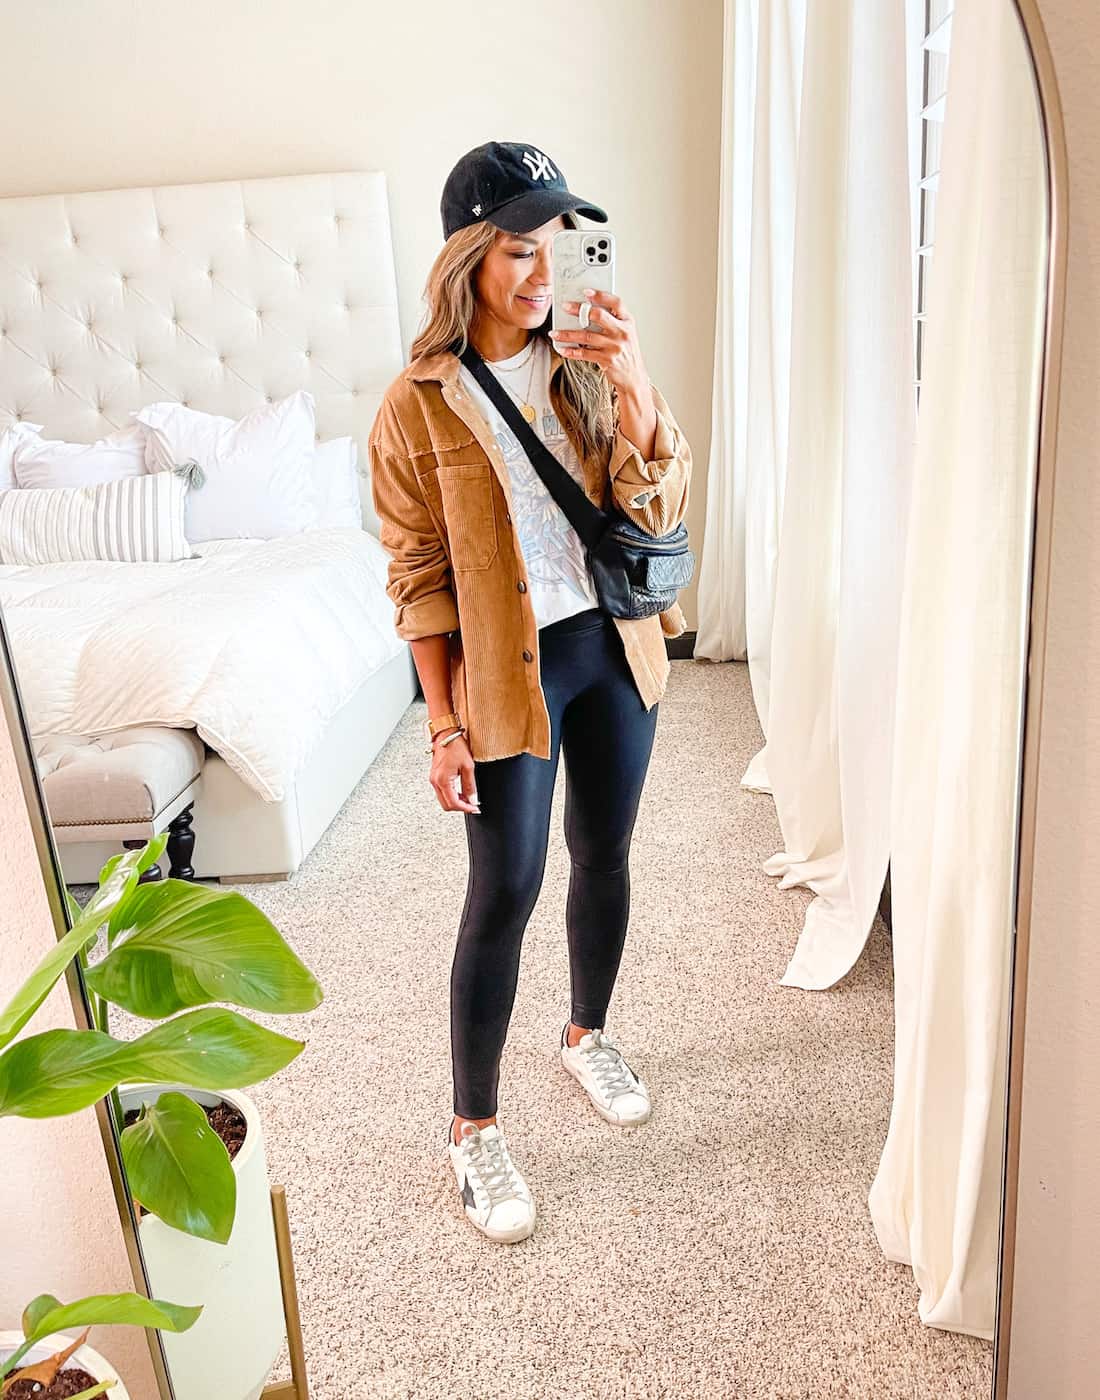 Autumn/Fall style: how to wear leather look leggings